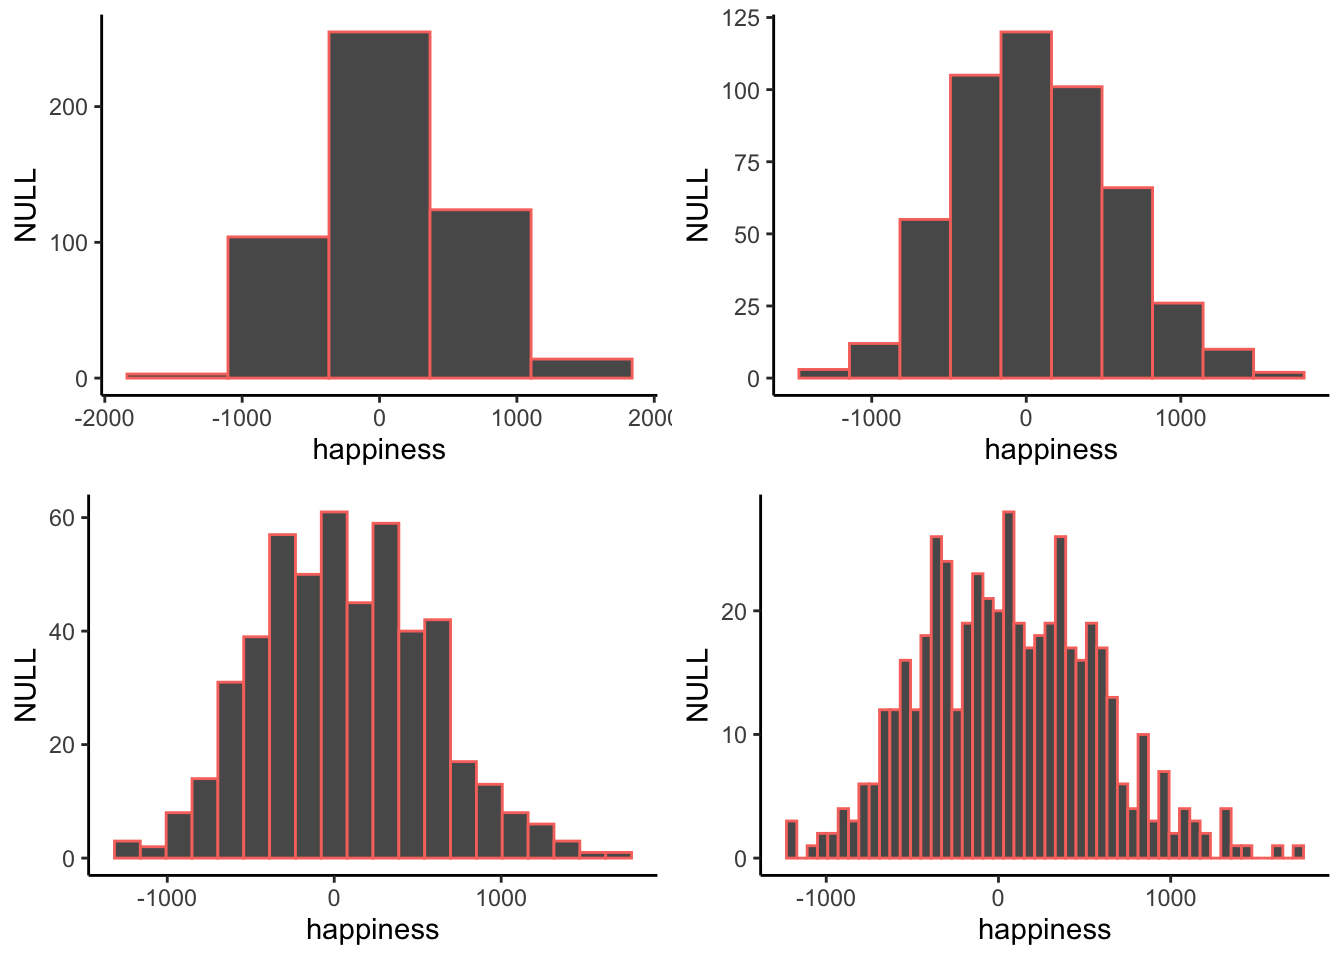 Four histograms of the same data using different bin widths.